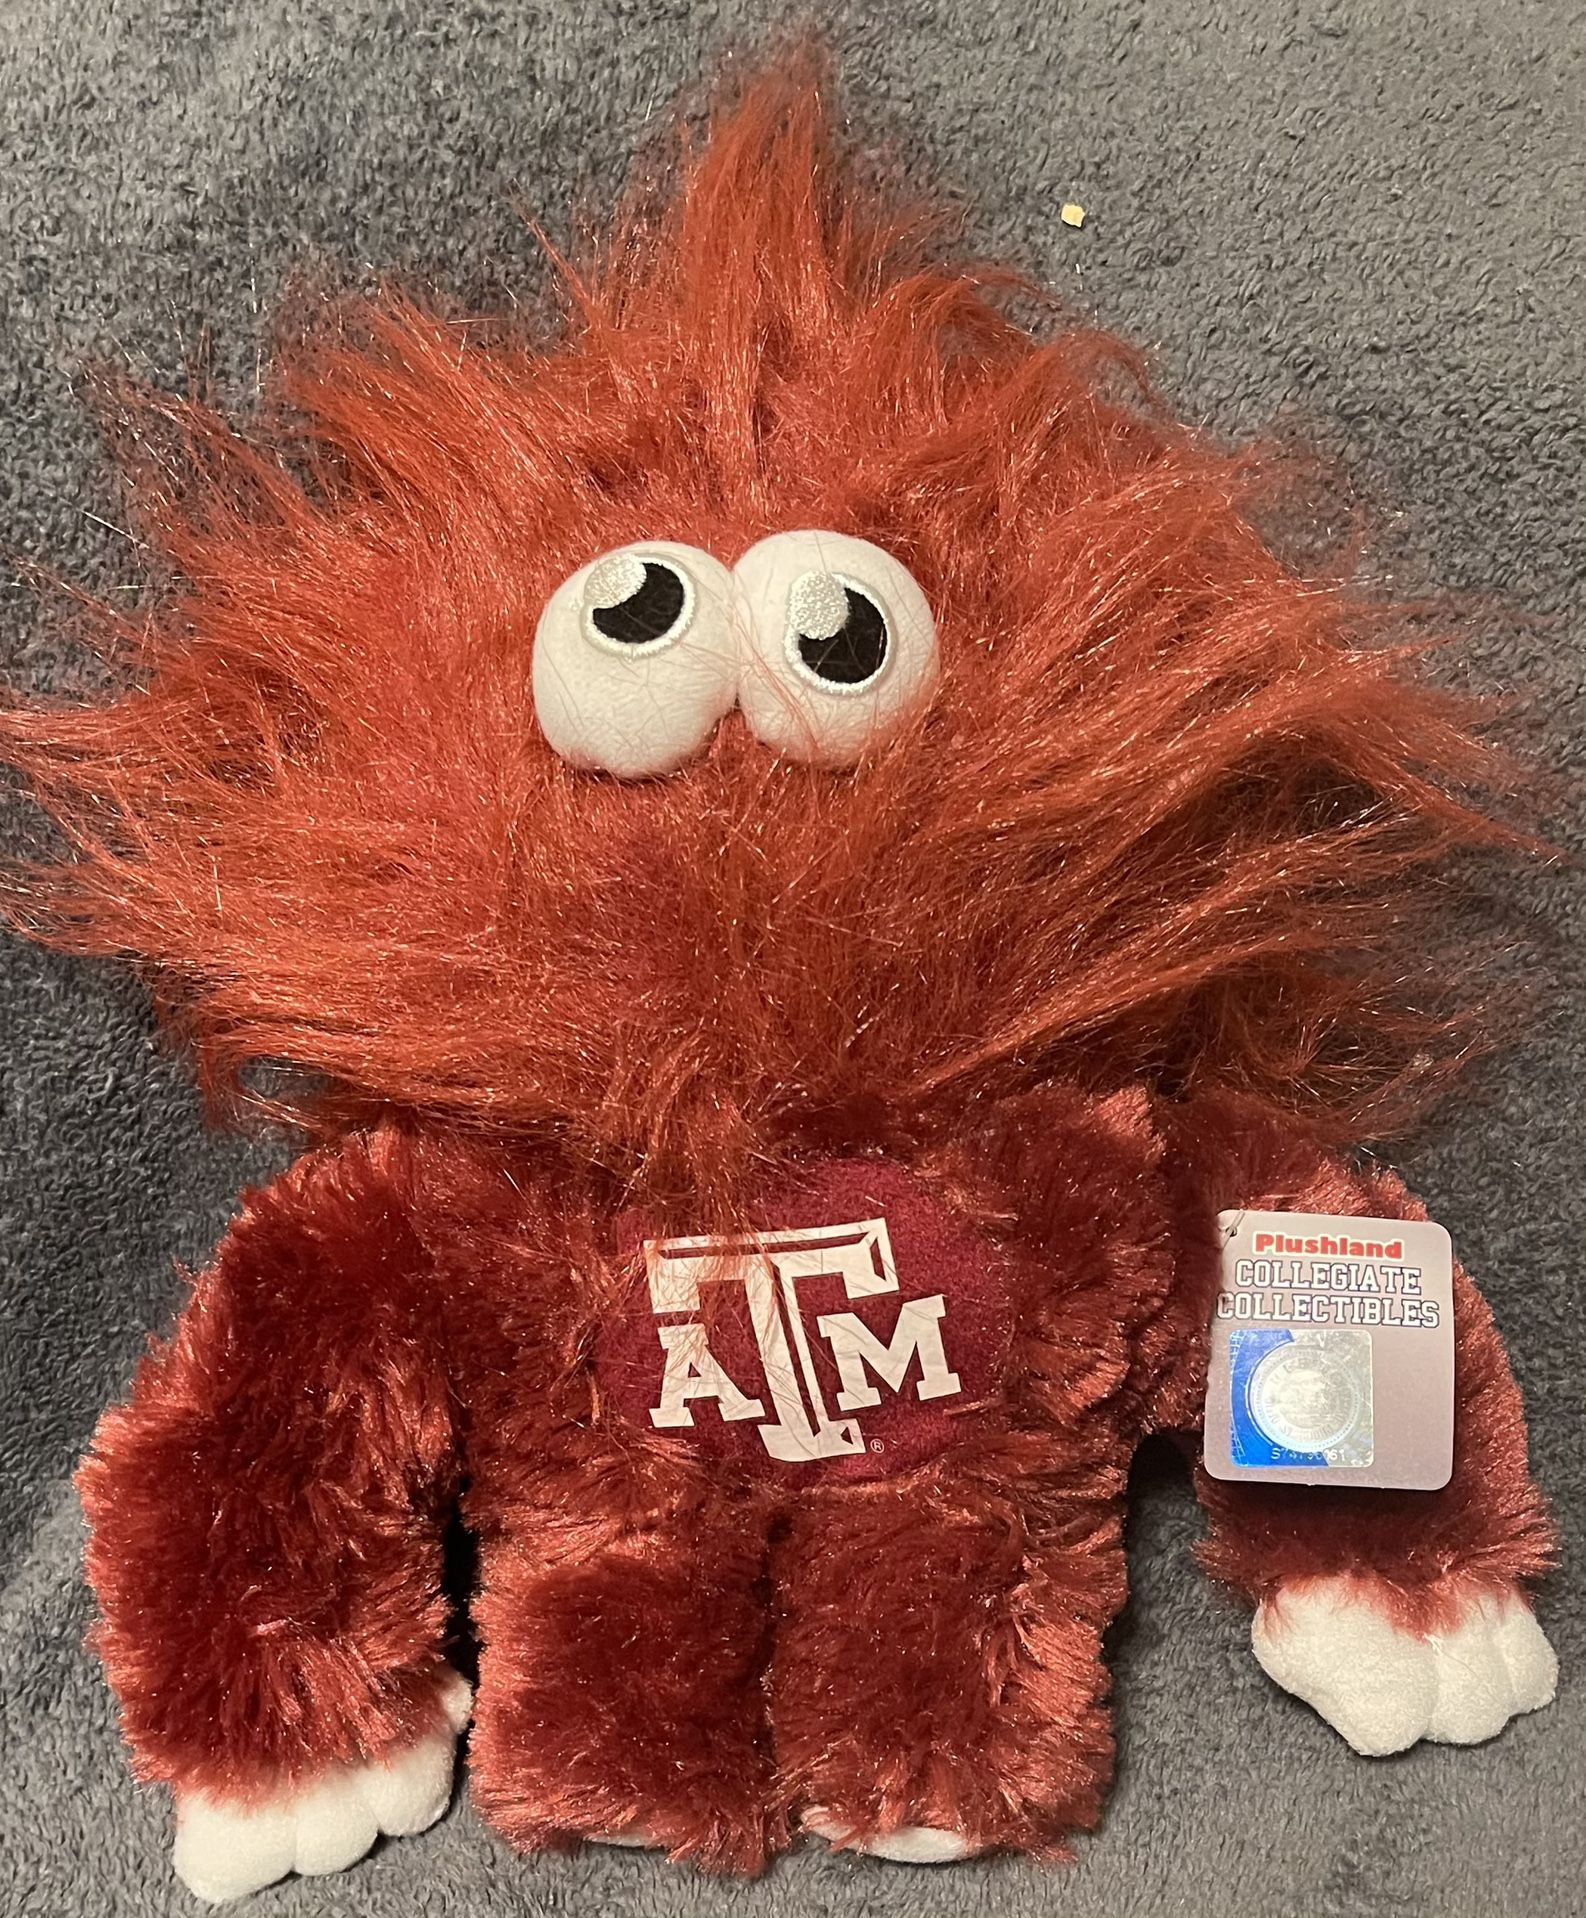 Plushland Collegiate Collectables Texas A&M University Fuzzy Monster Plush 2013.  